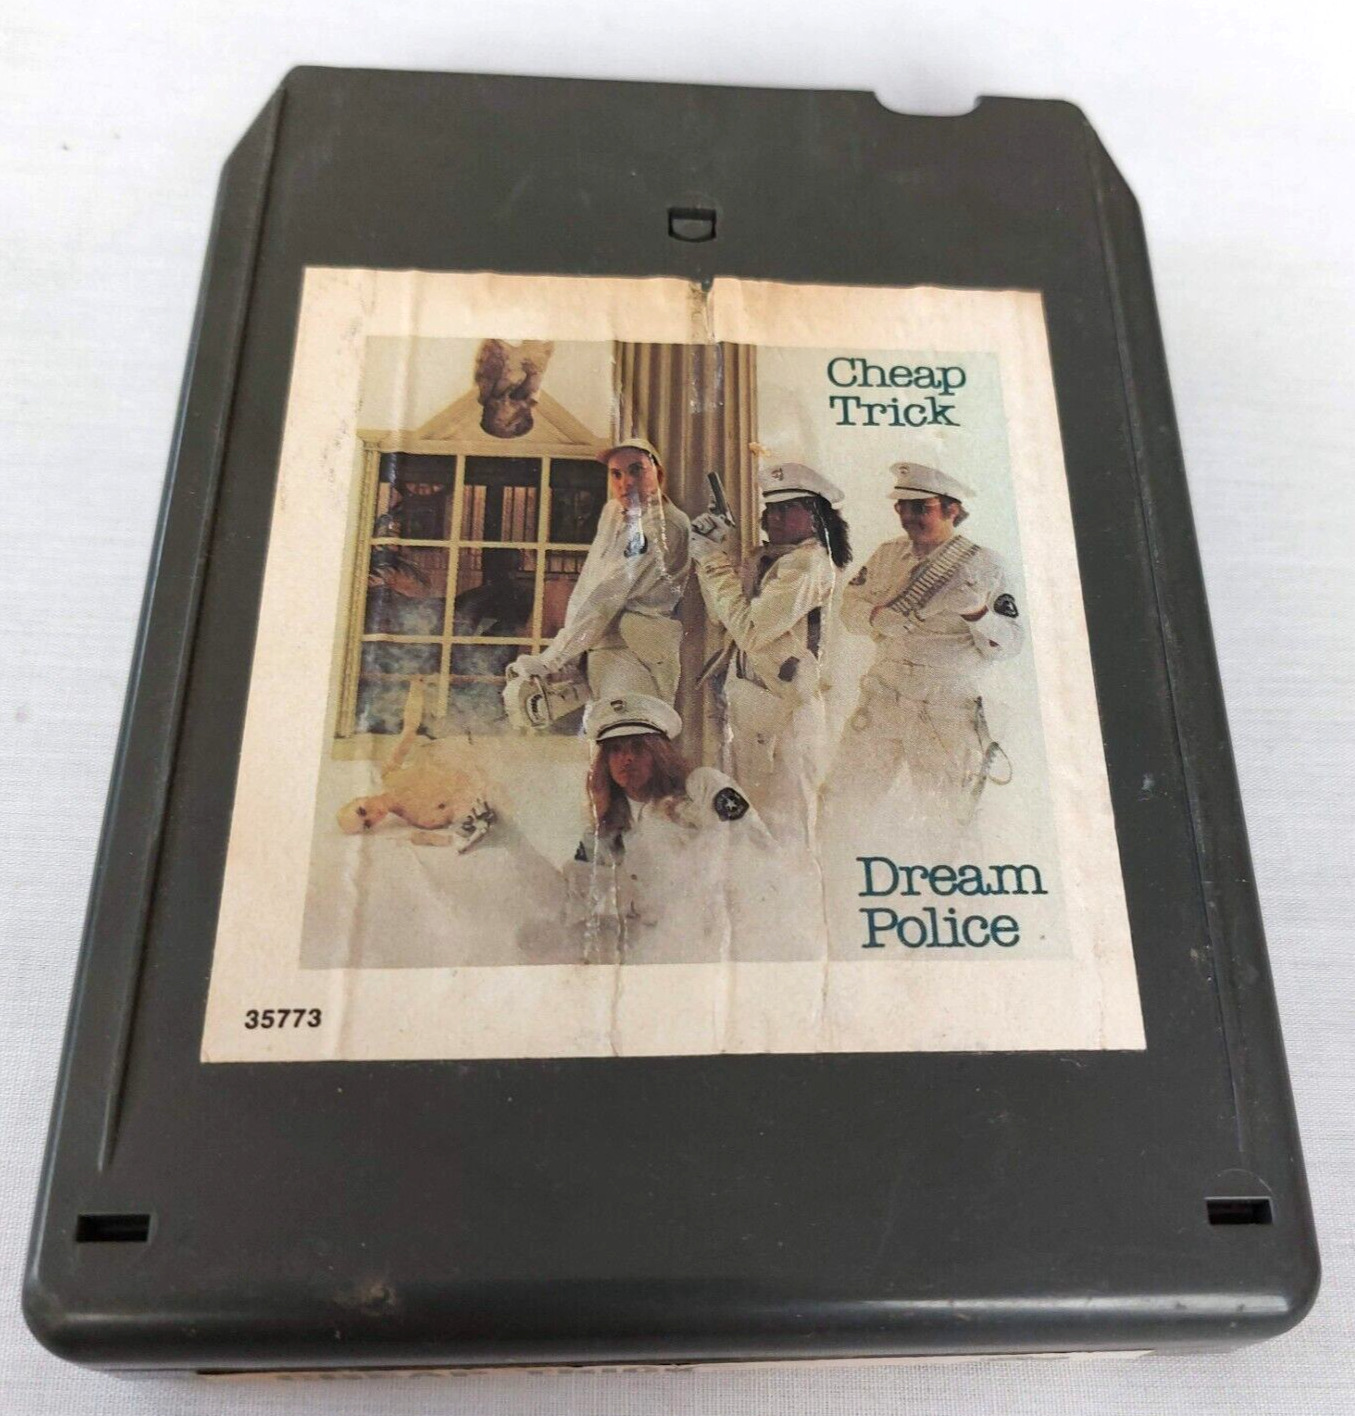 Vintage 8 Track Tape Cheap Trick Dream Police Tested and Clean, Label wear